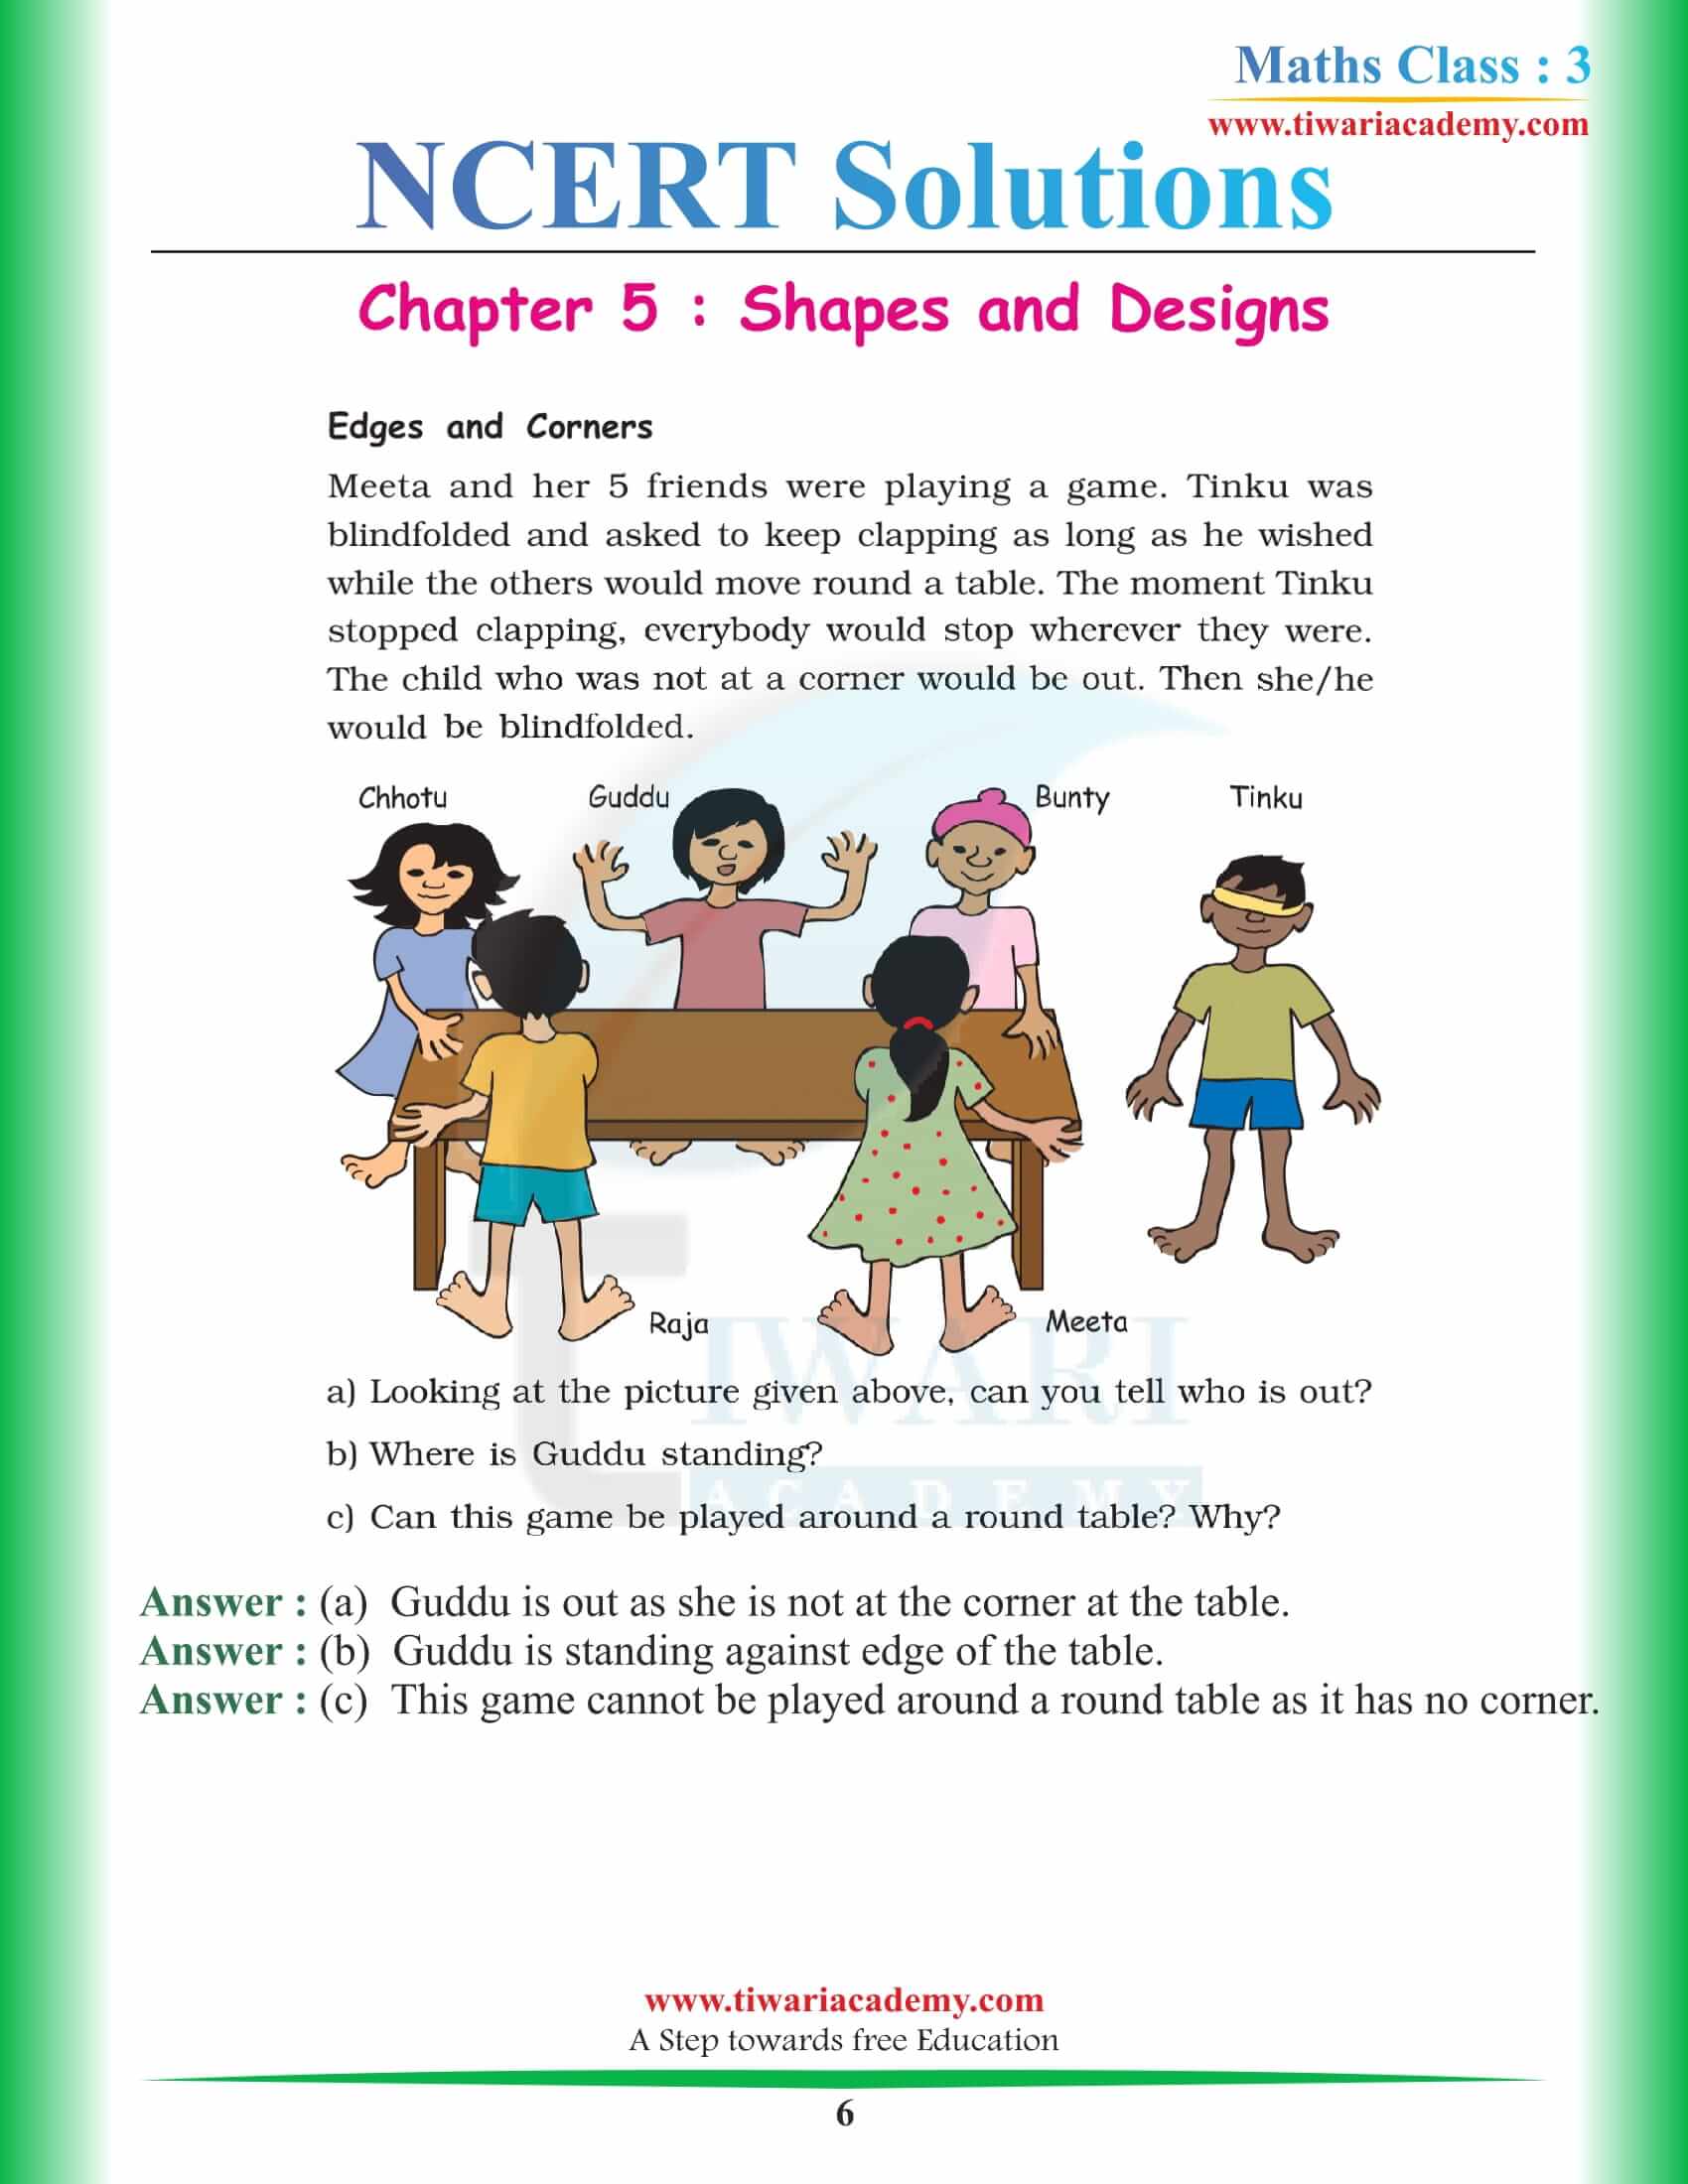 NCERT Solutions for Class 3 Maths Chapter 5 in English Medium